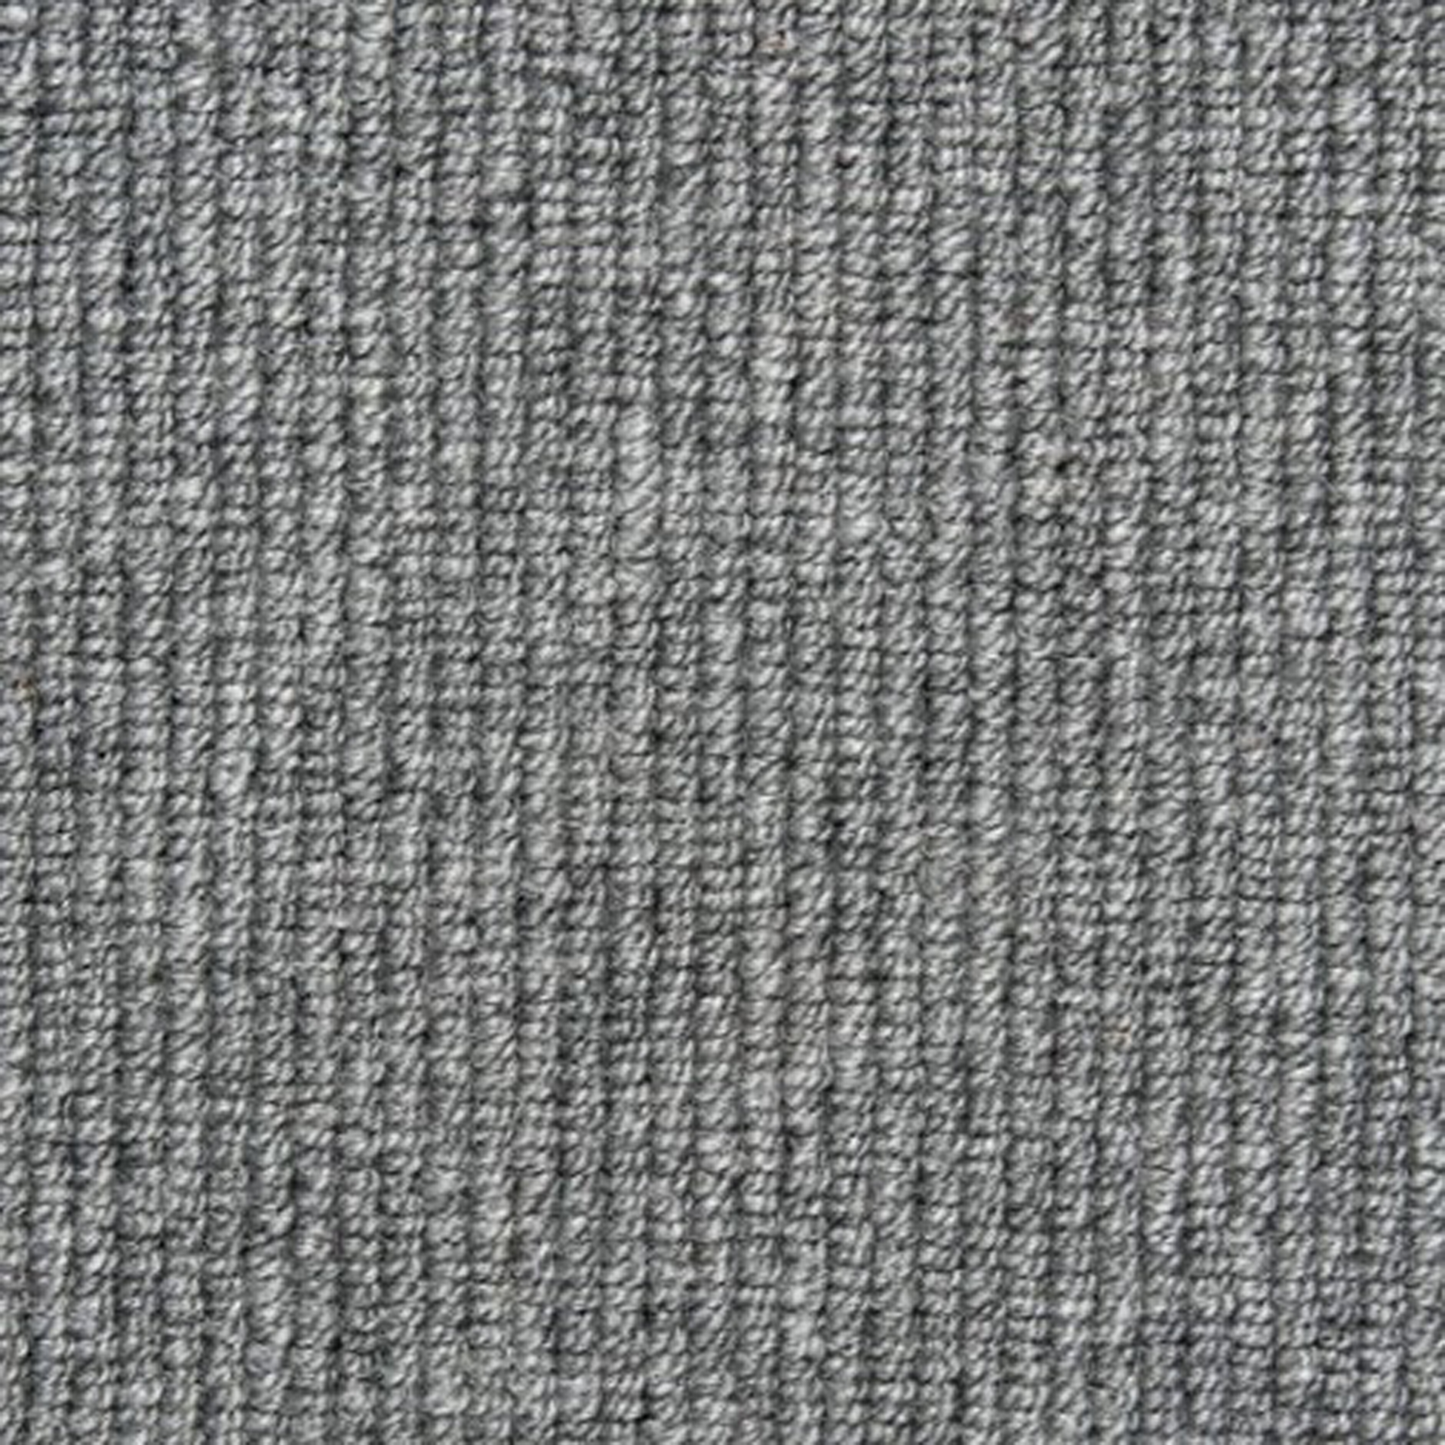 Henty Wool Blend Carpet Collection Wool Carpet by KLD Home